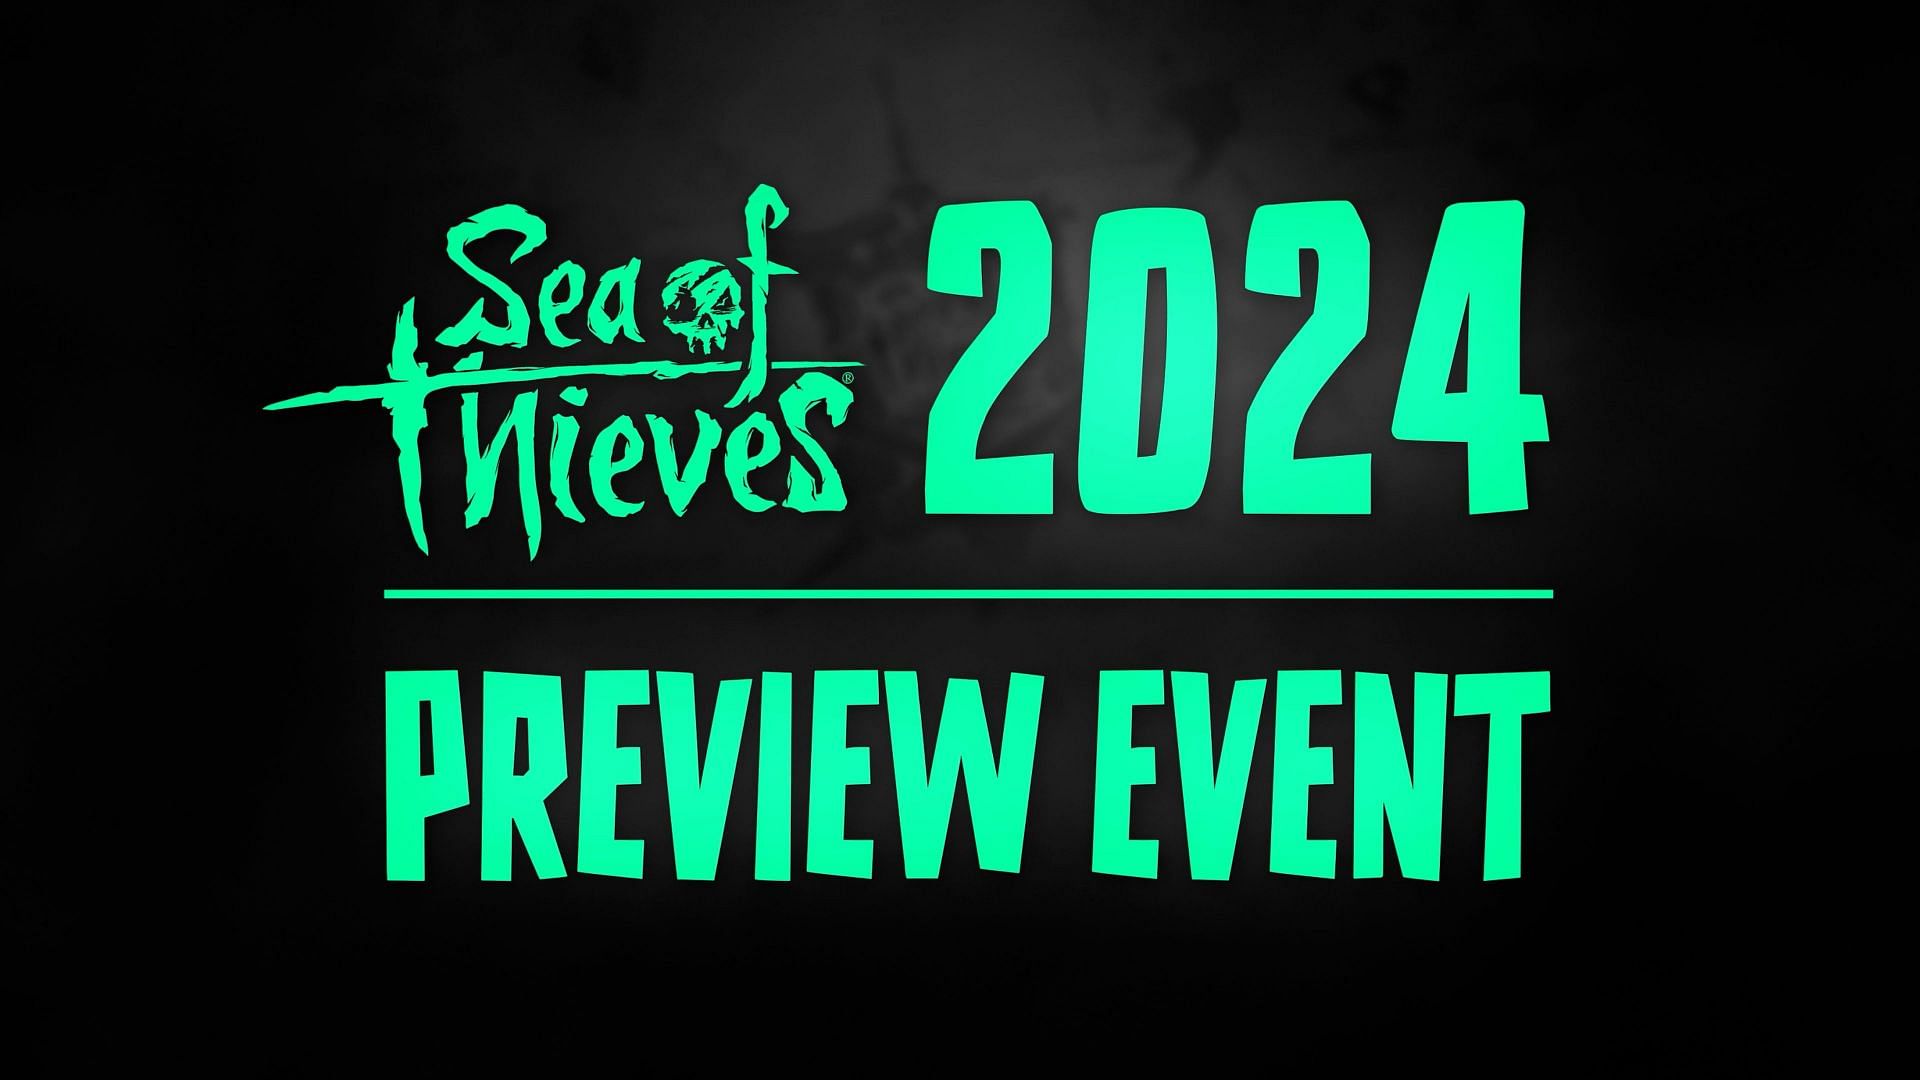 Sea of Thieves 2024 Preview Event.